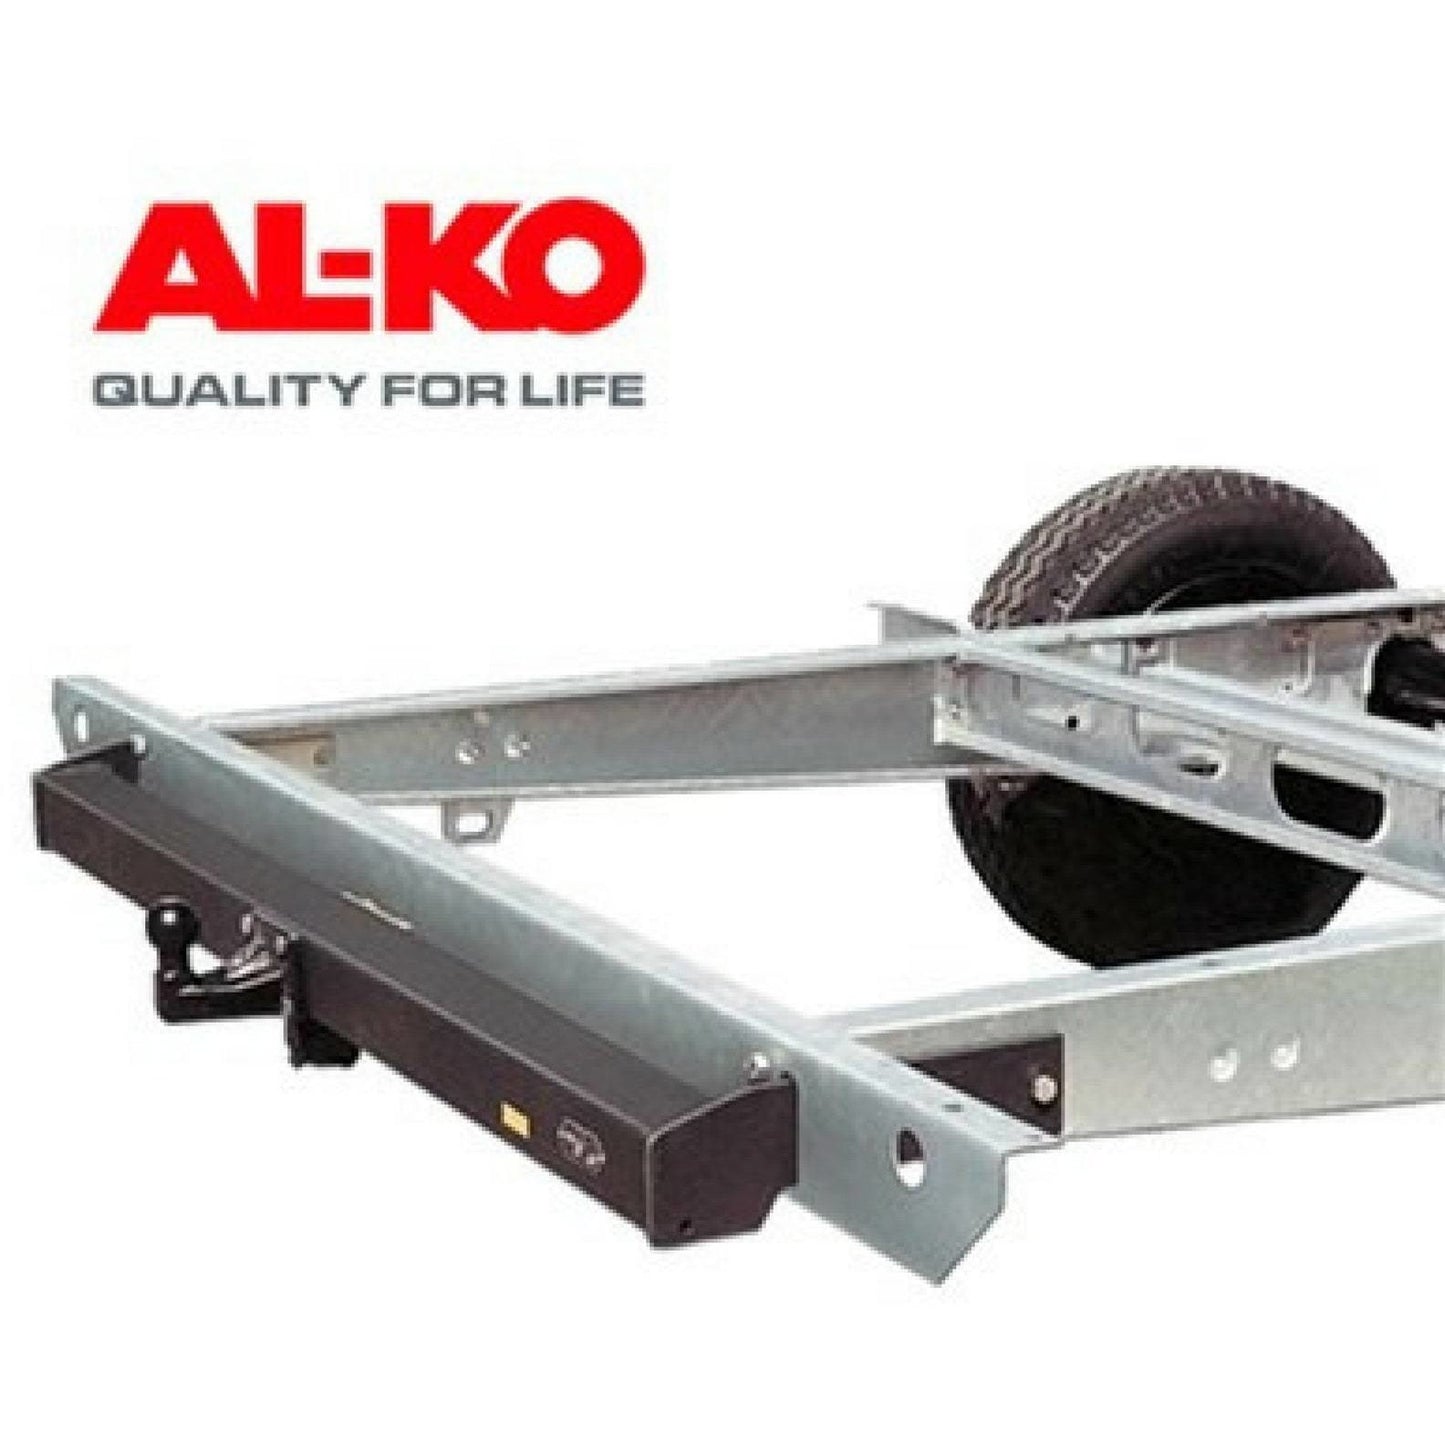 ALKO Towbar Assembly (1620357) made by ALKO. A Towing sold by Quality Caravan Awnings